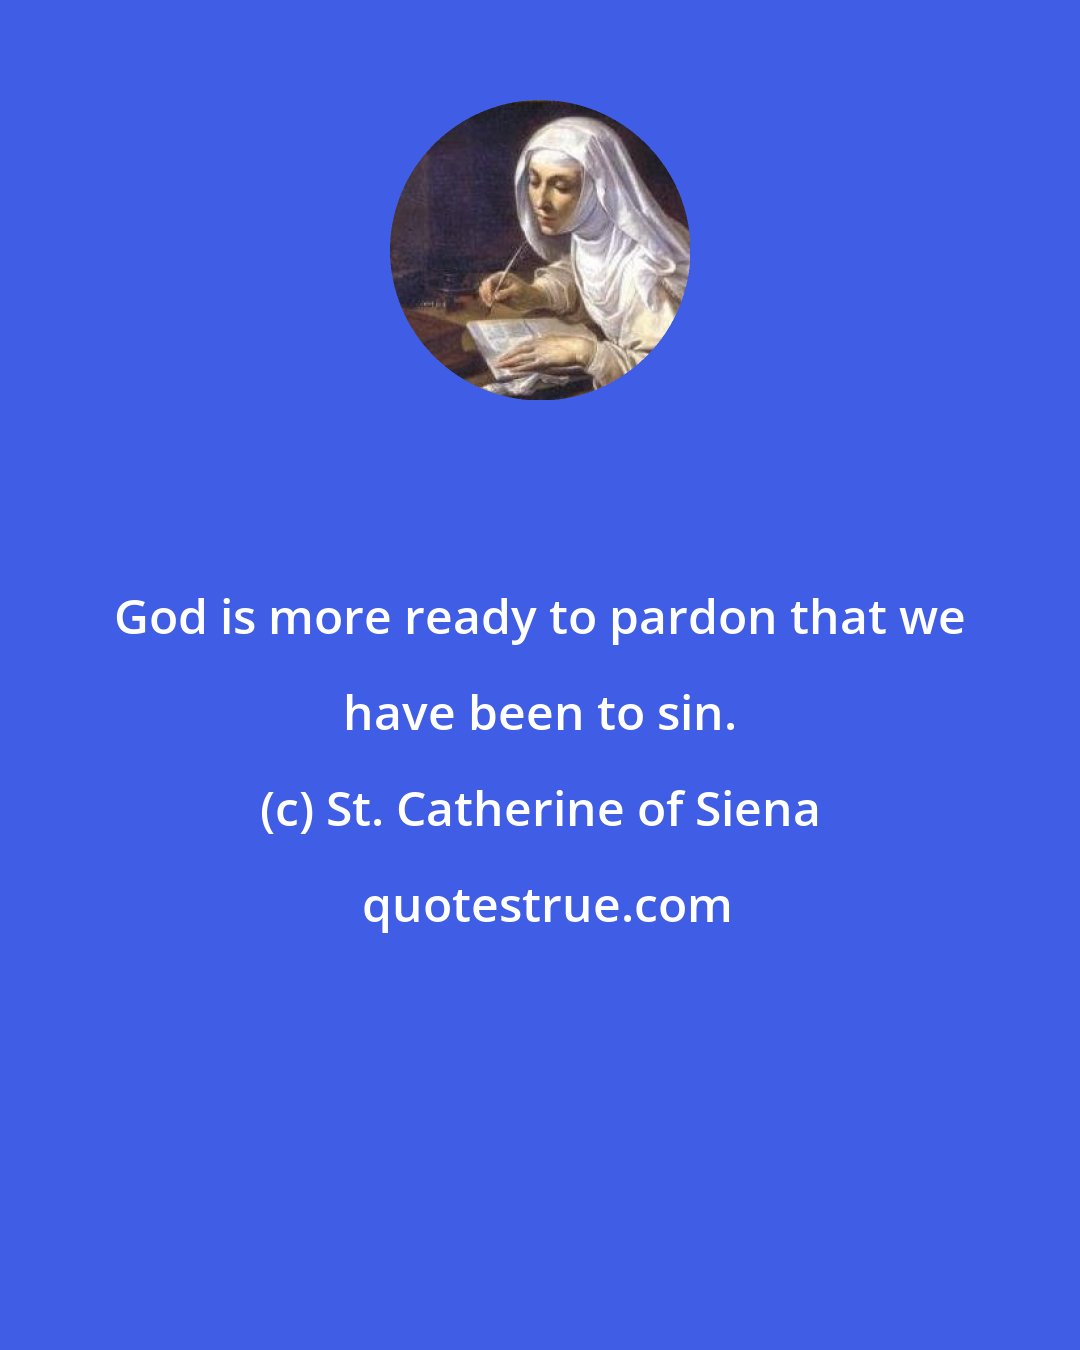 St. Catherine of Siena: God is more ready to pardon that we have been to sin.